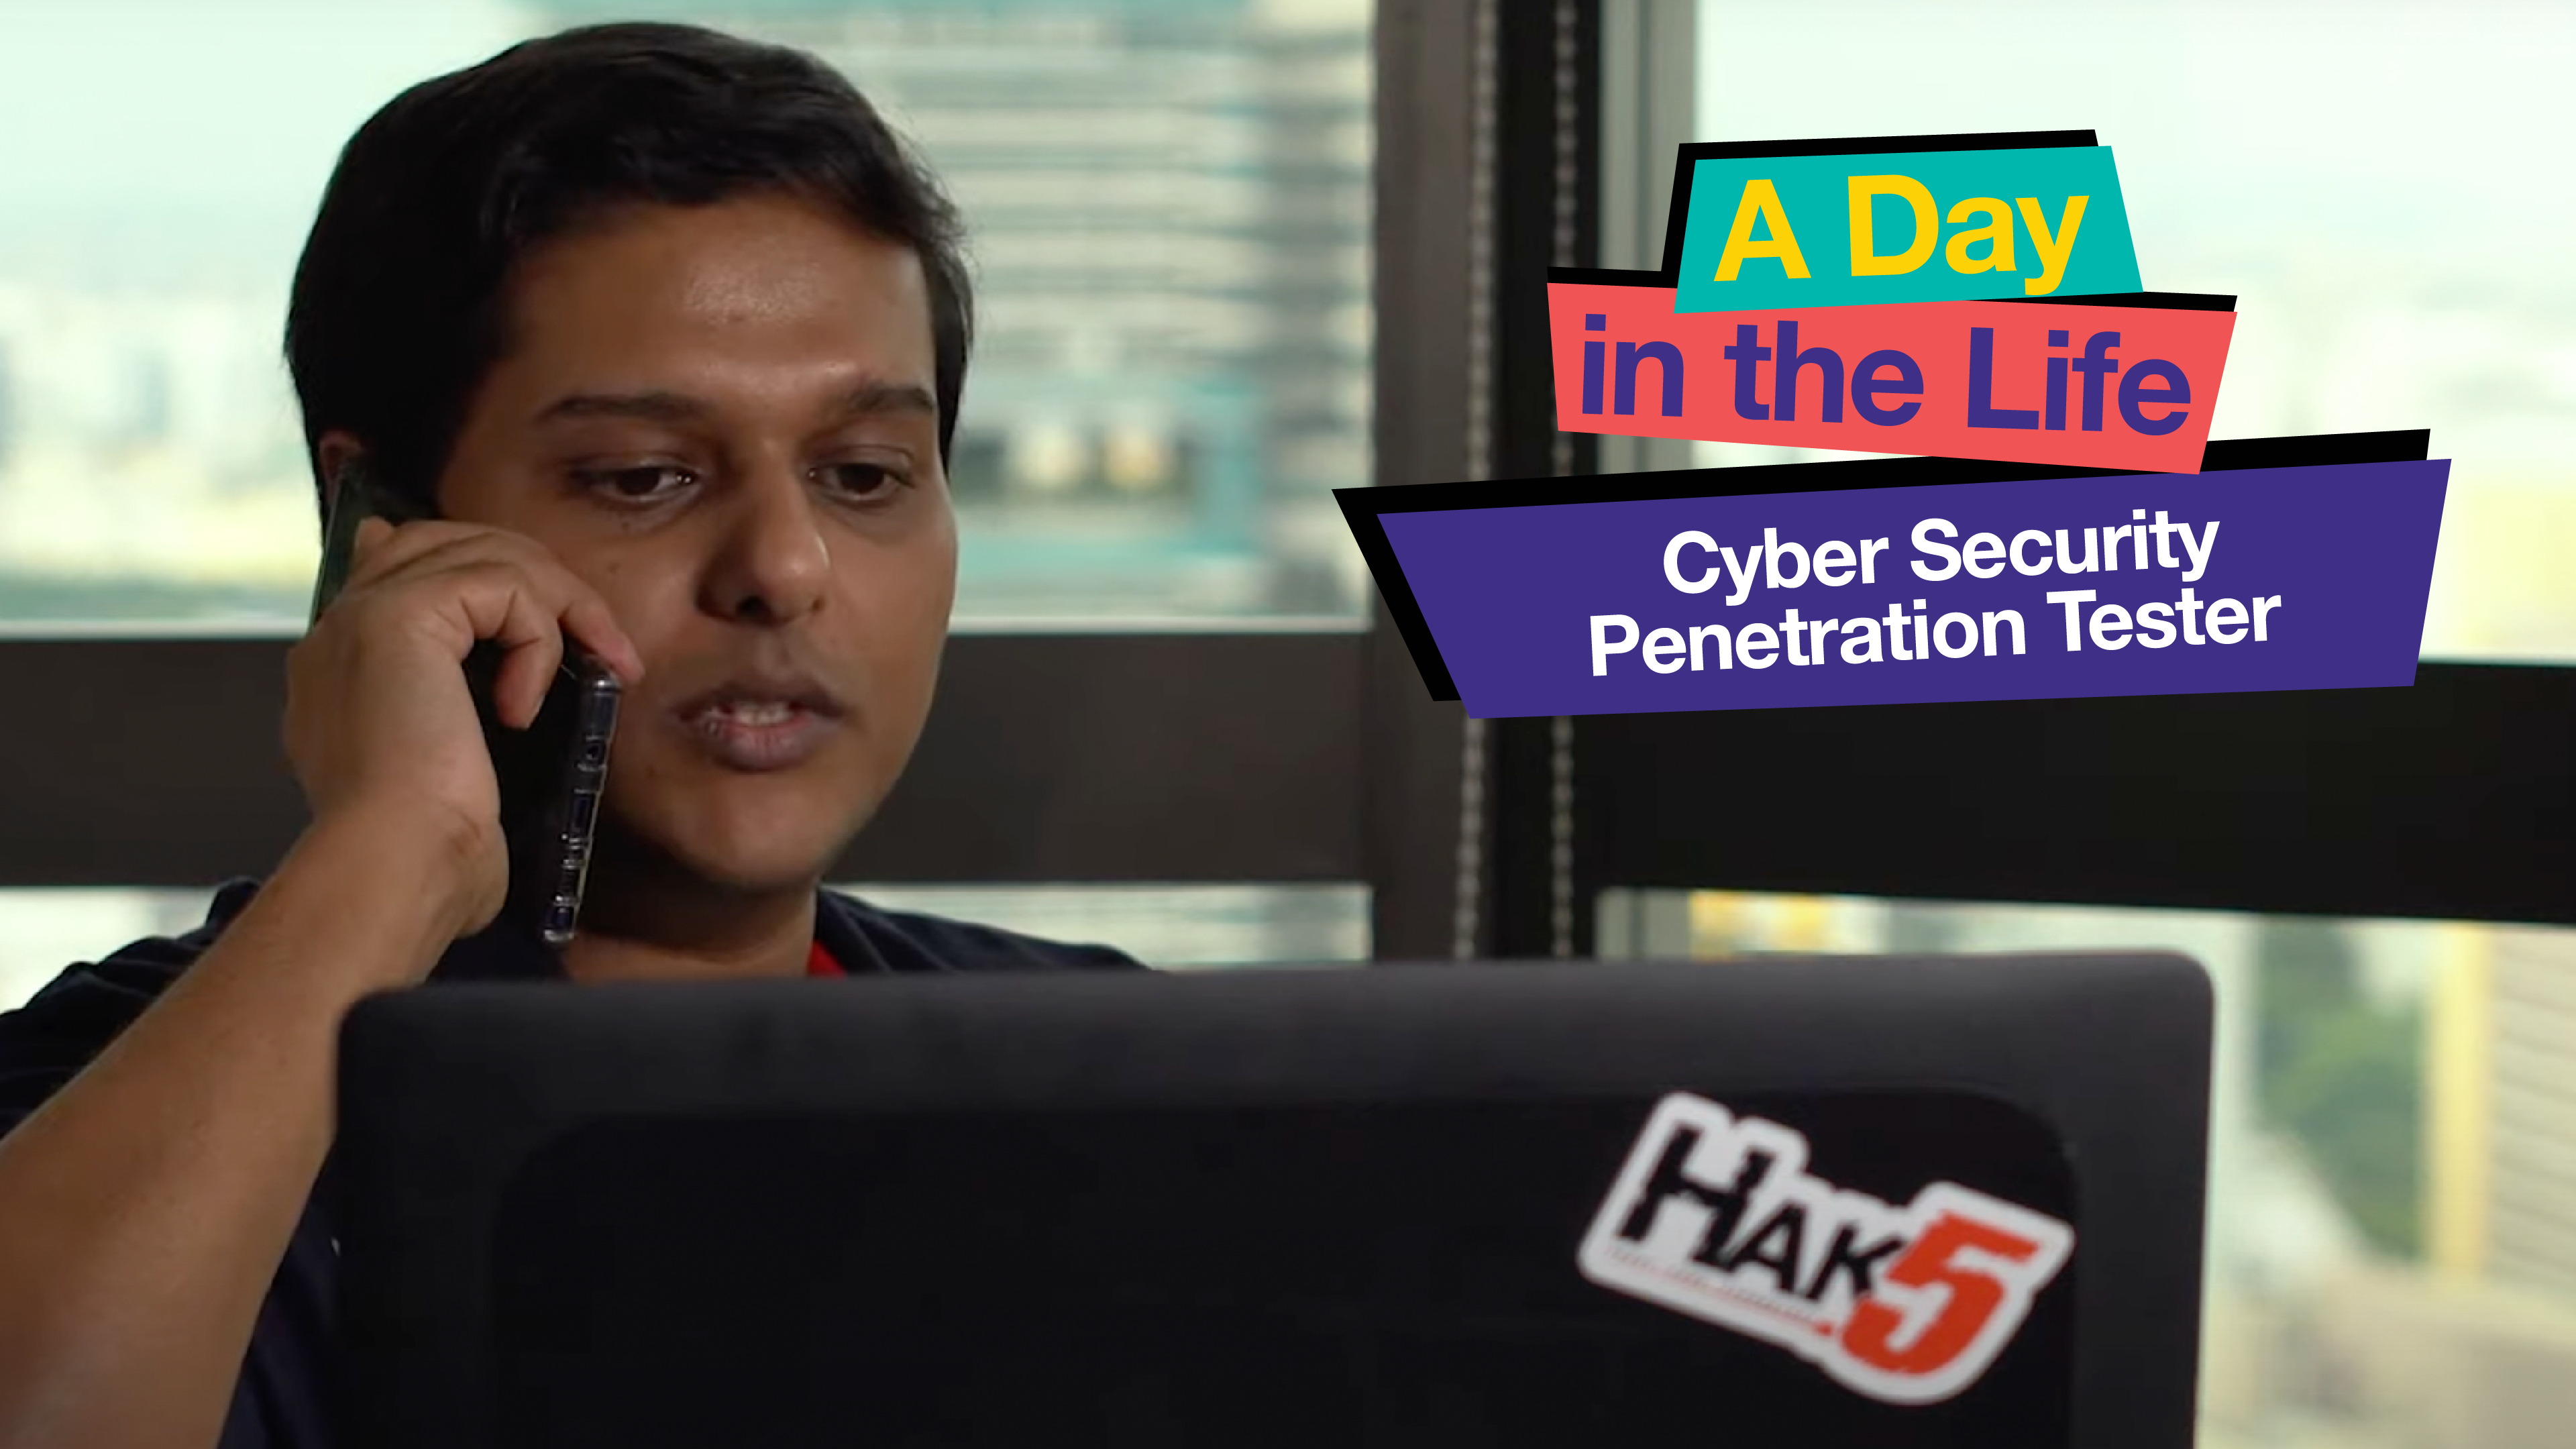 Cyber Security Penetration Tester